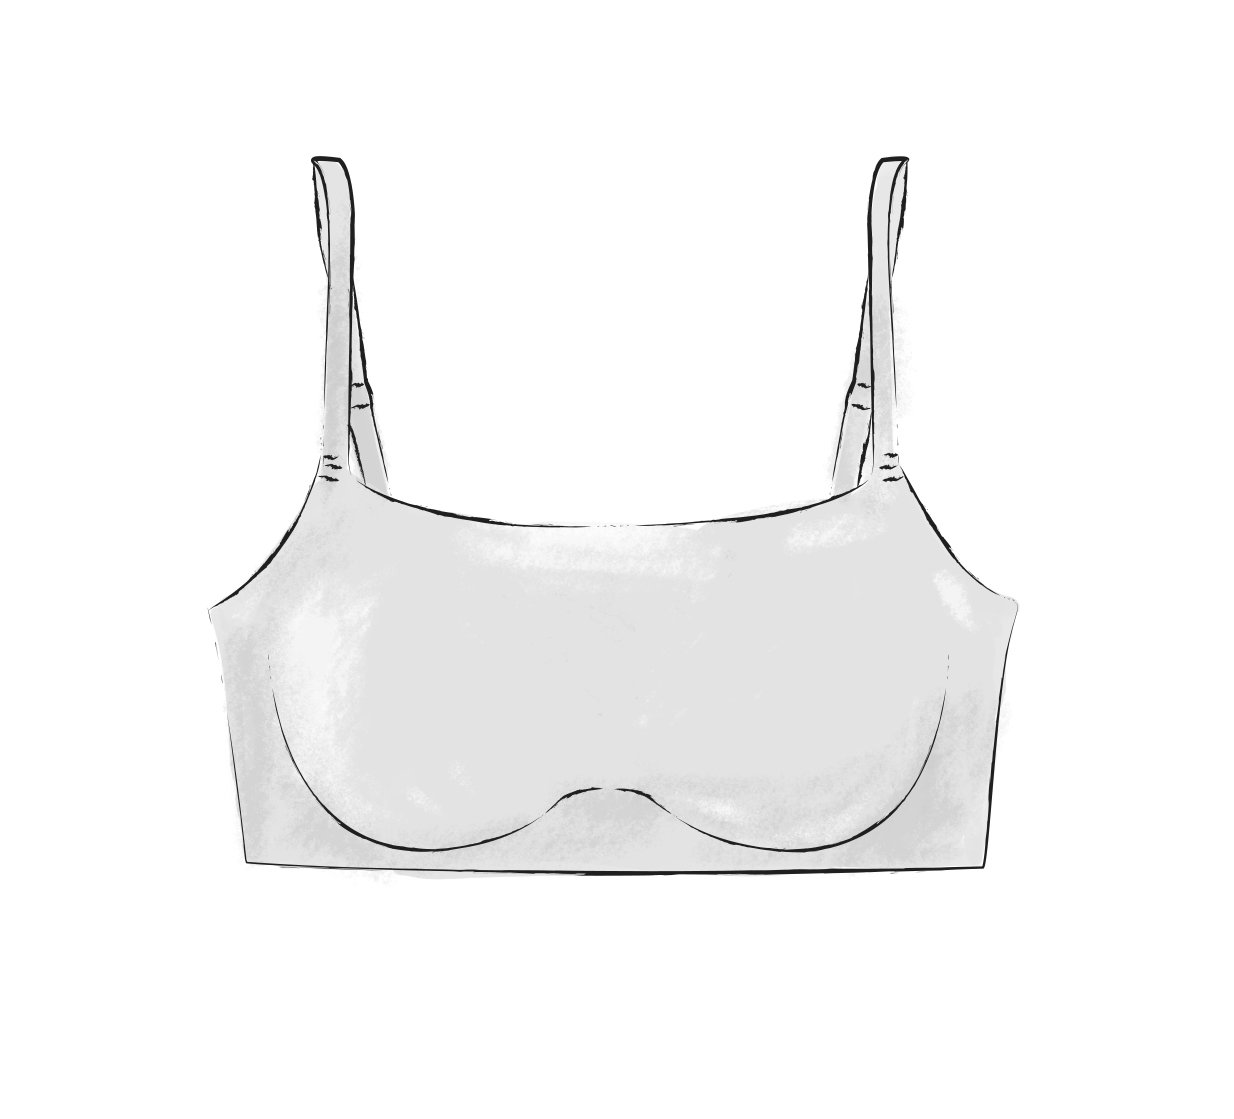 20 Bra Types for Every Woman